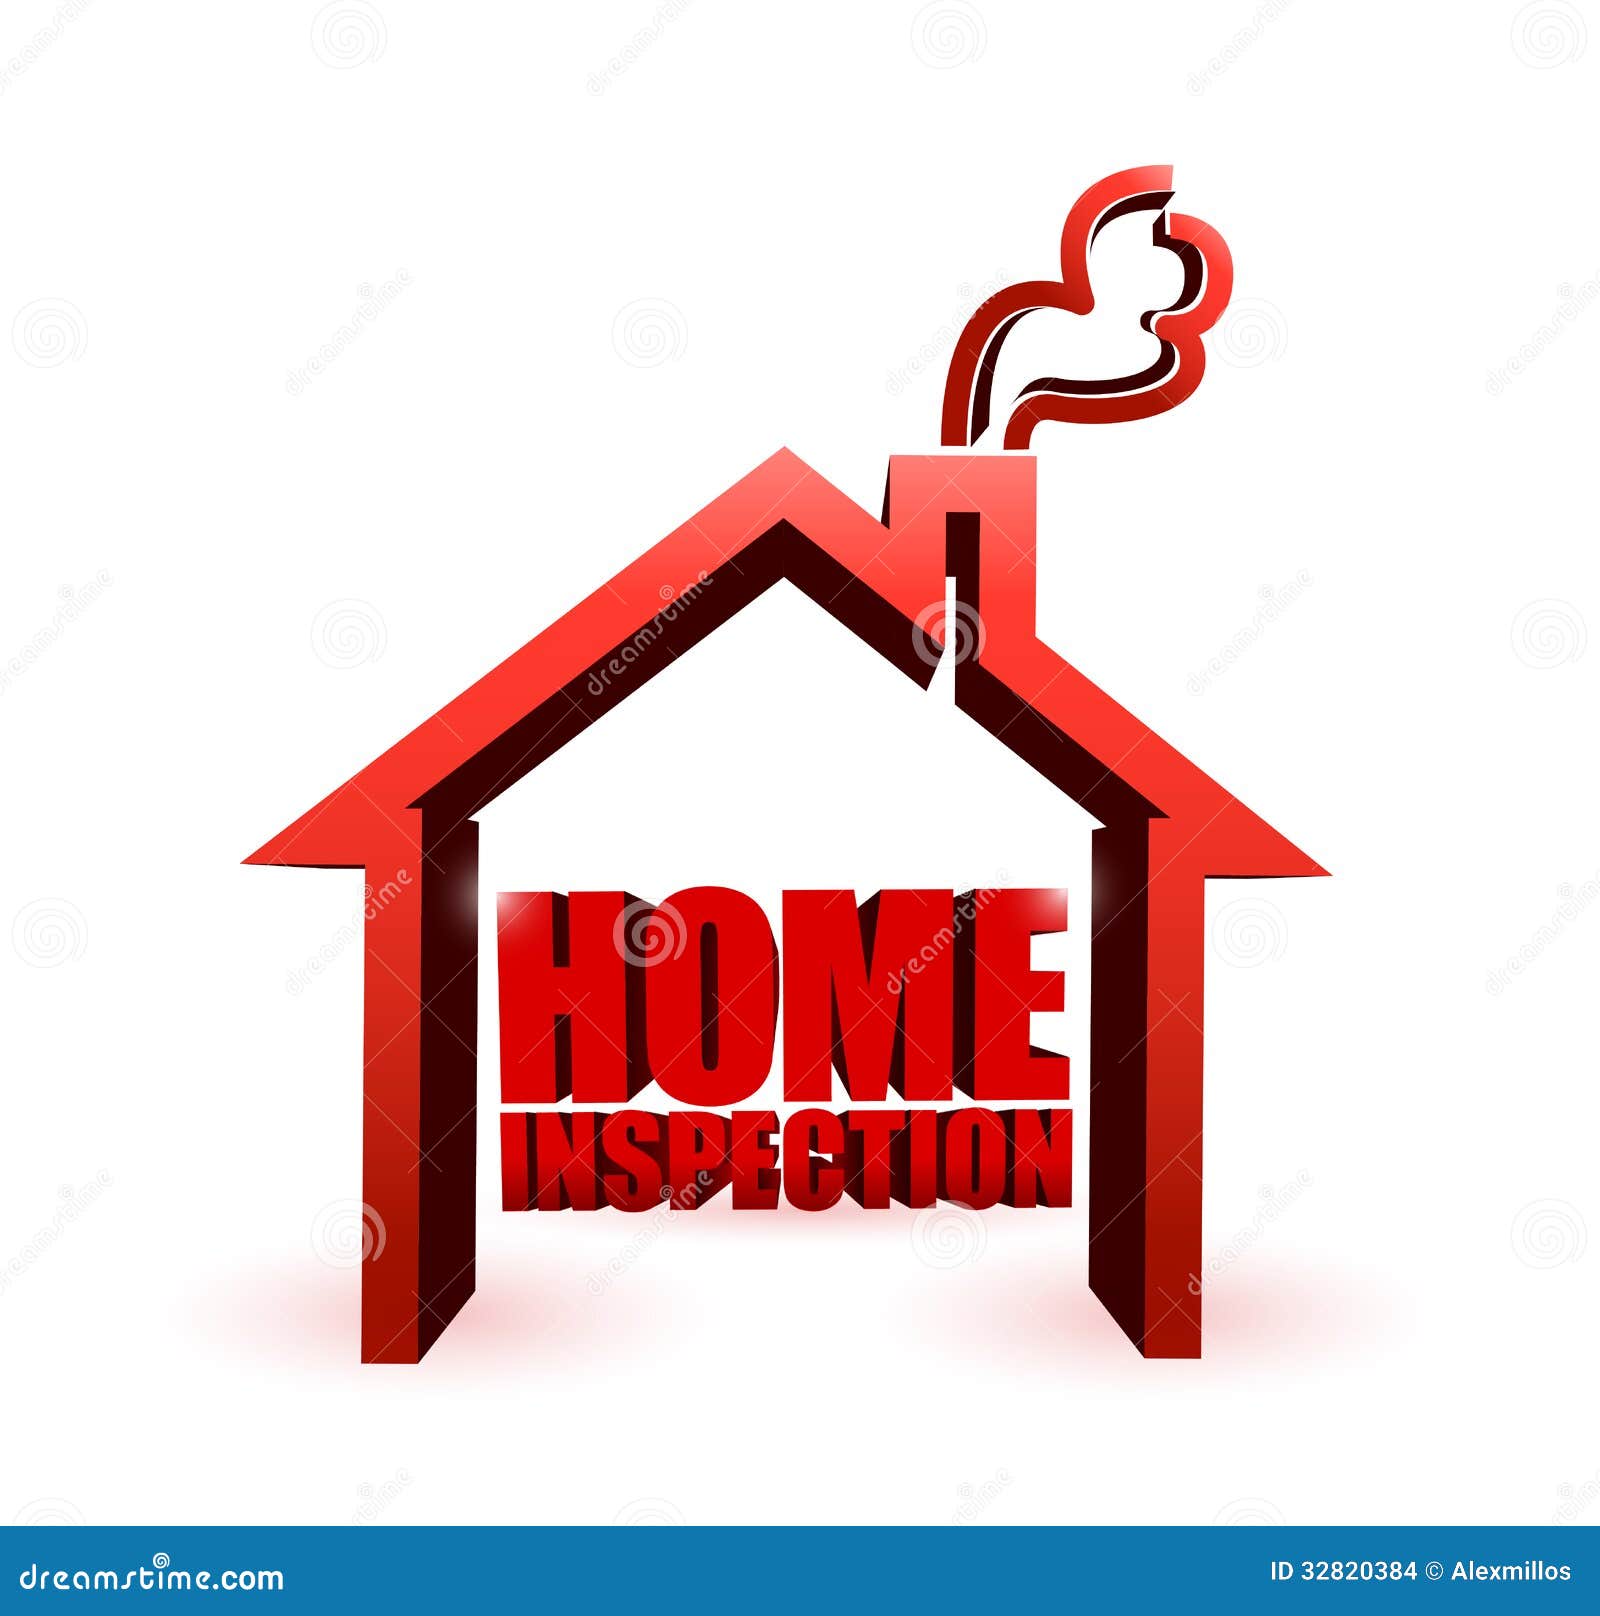 home inspector clipart - photo #21